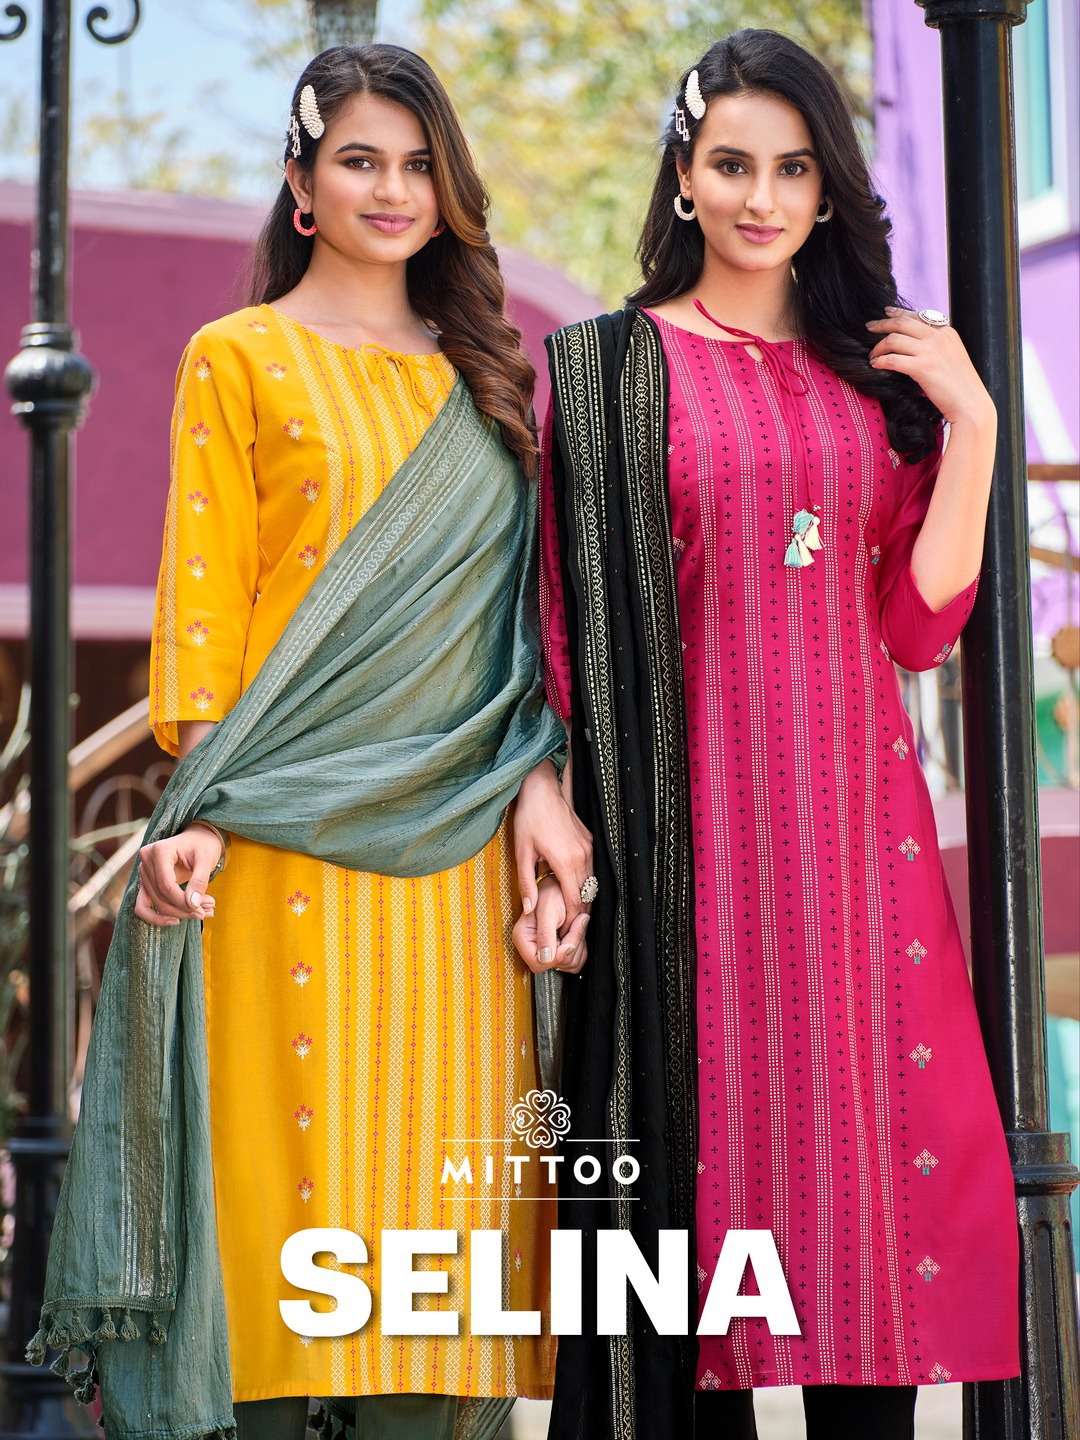 SELINA BY MITTOO 11001 TO 11006 SERIES HEAVY VISCOSE DRESSES